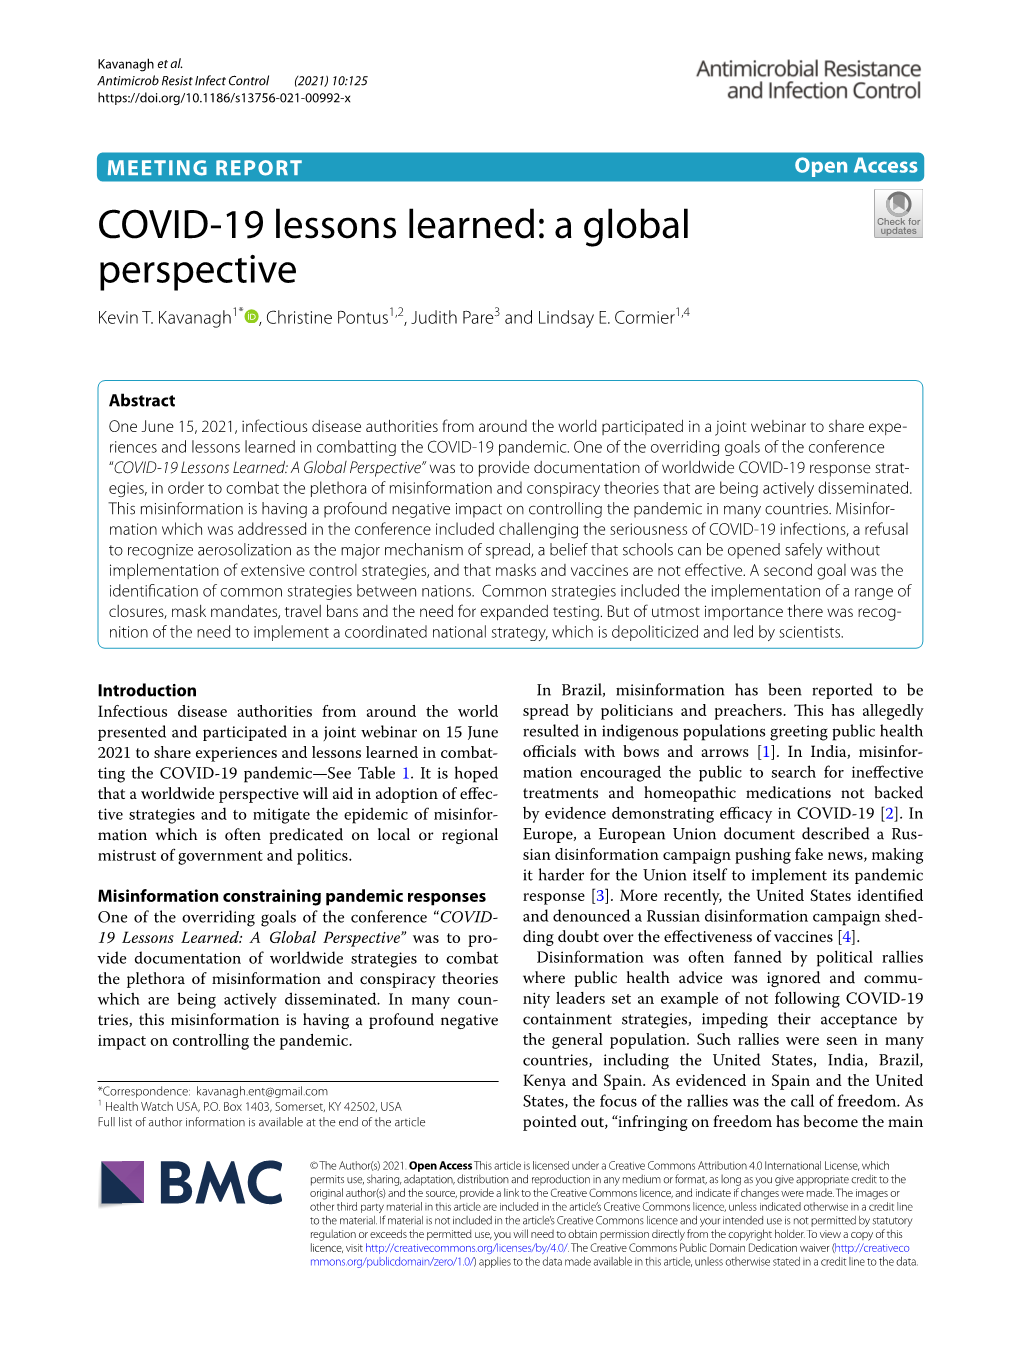 COVID-19 Lessons Learned